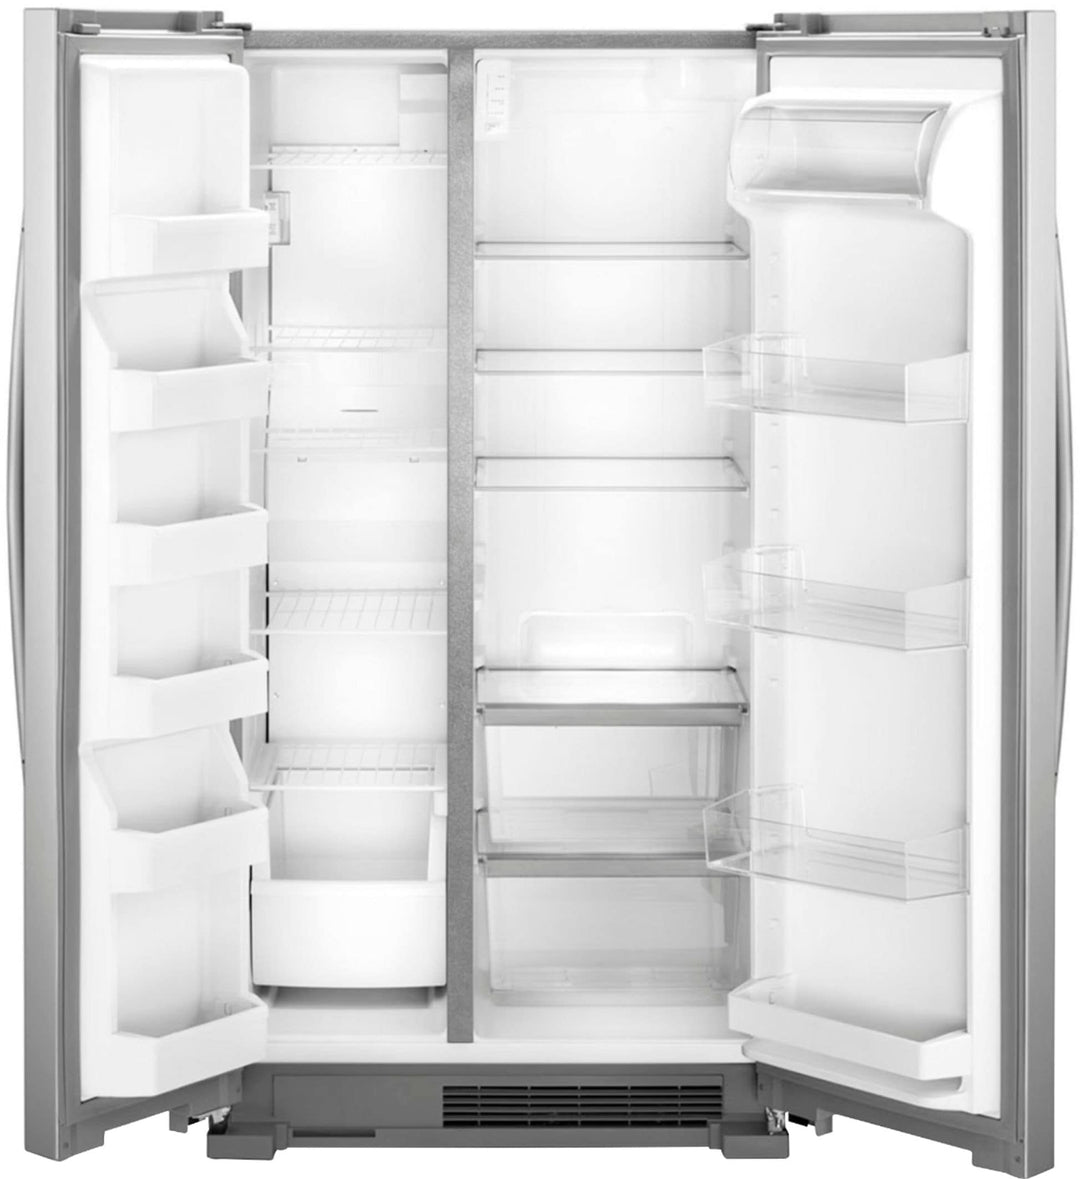 Whirlpool - 25.1 Cu. Ft. Side-by-Side Refrigerator - Stainless steel_3